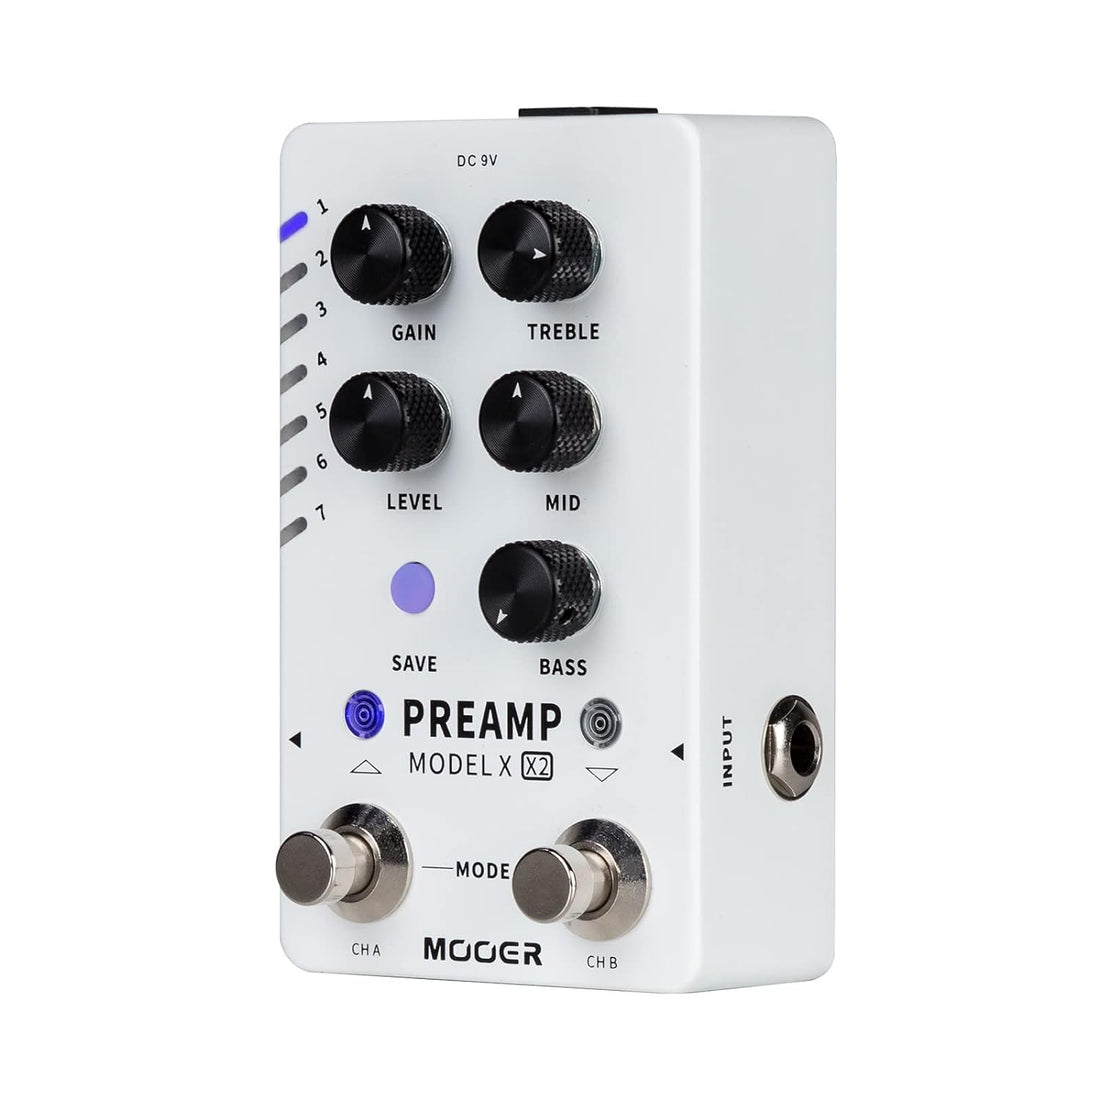 MOOER Preamp X2 Dual-channel Digital Preamp Pedal with 14 Preset Slots Supporting loading MNRS, GNR, and GIR files via MOOER STUDIO to Expand Ttonal Palette